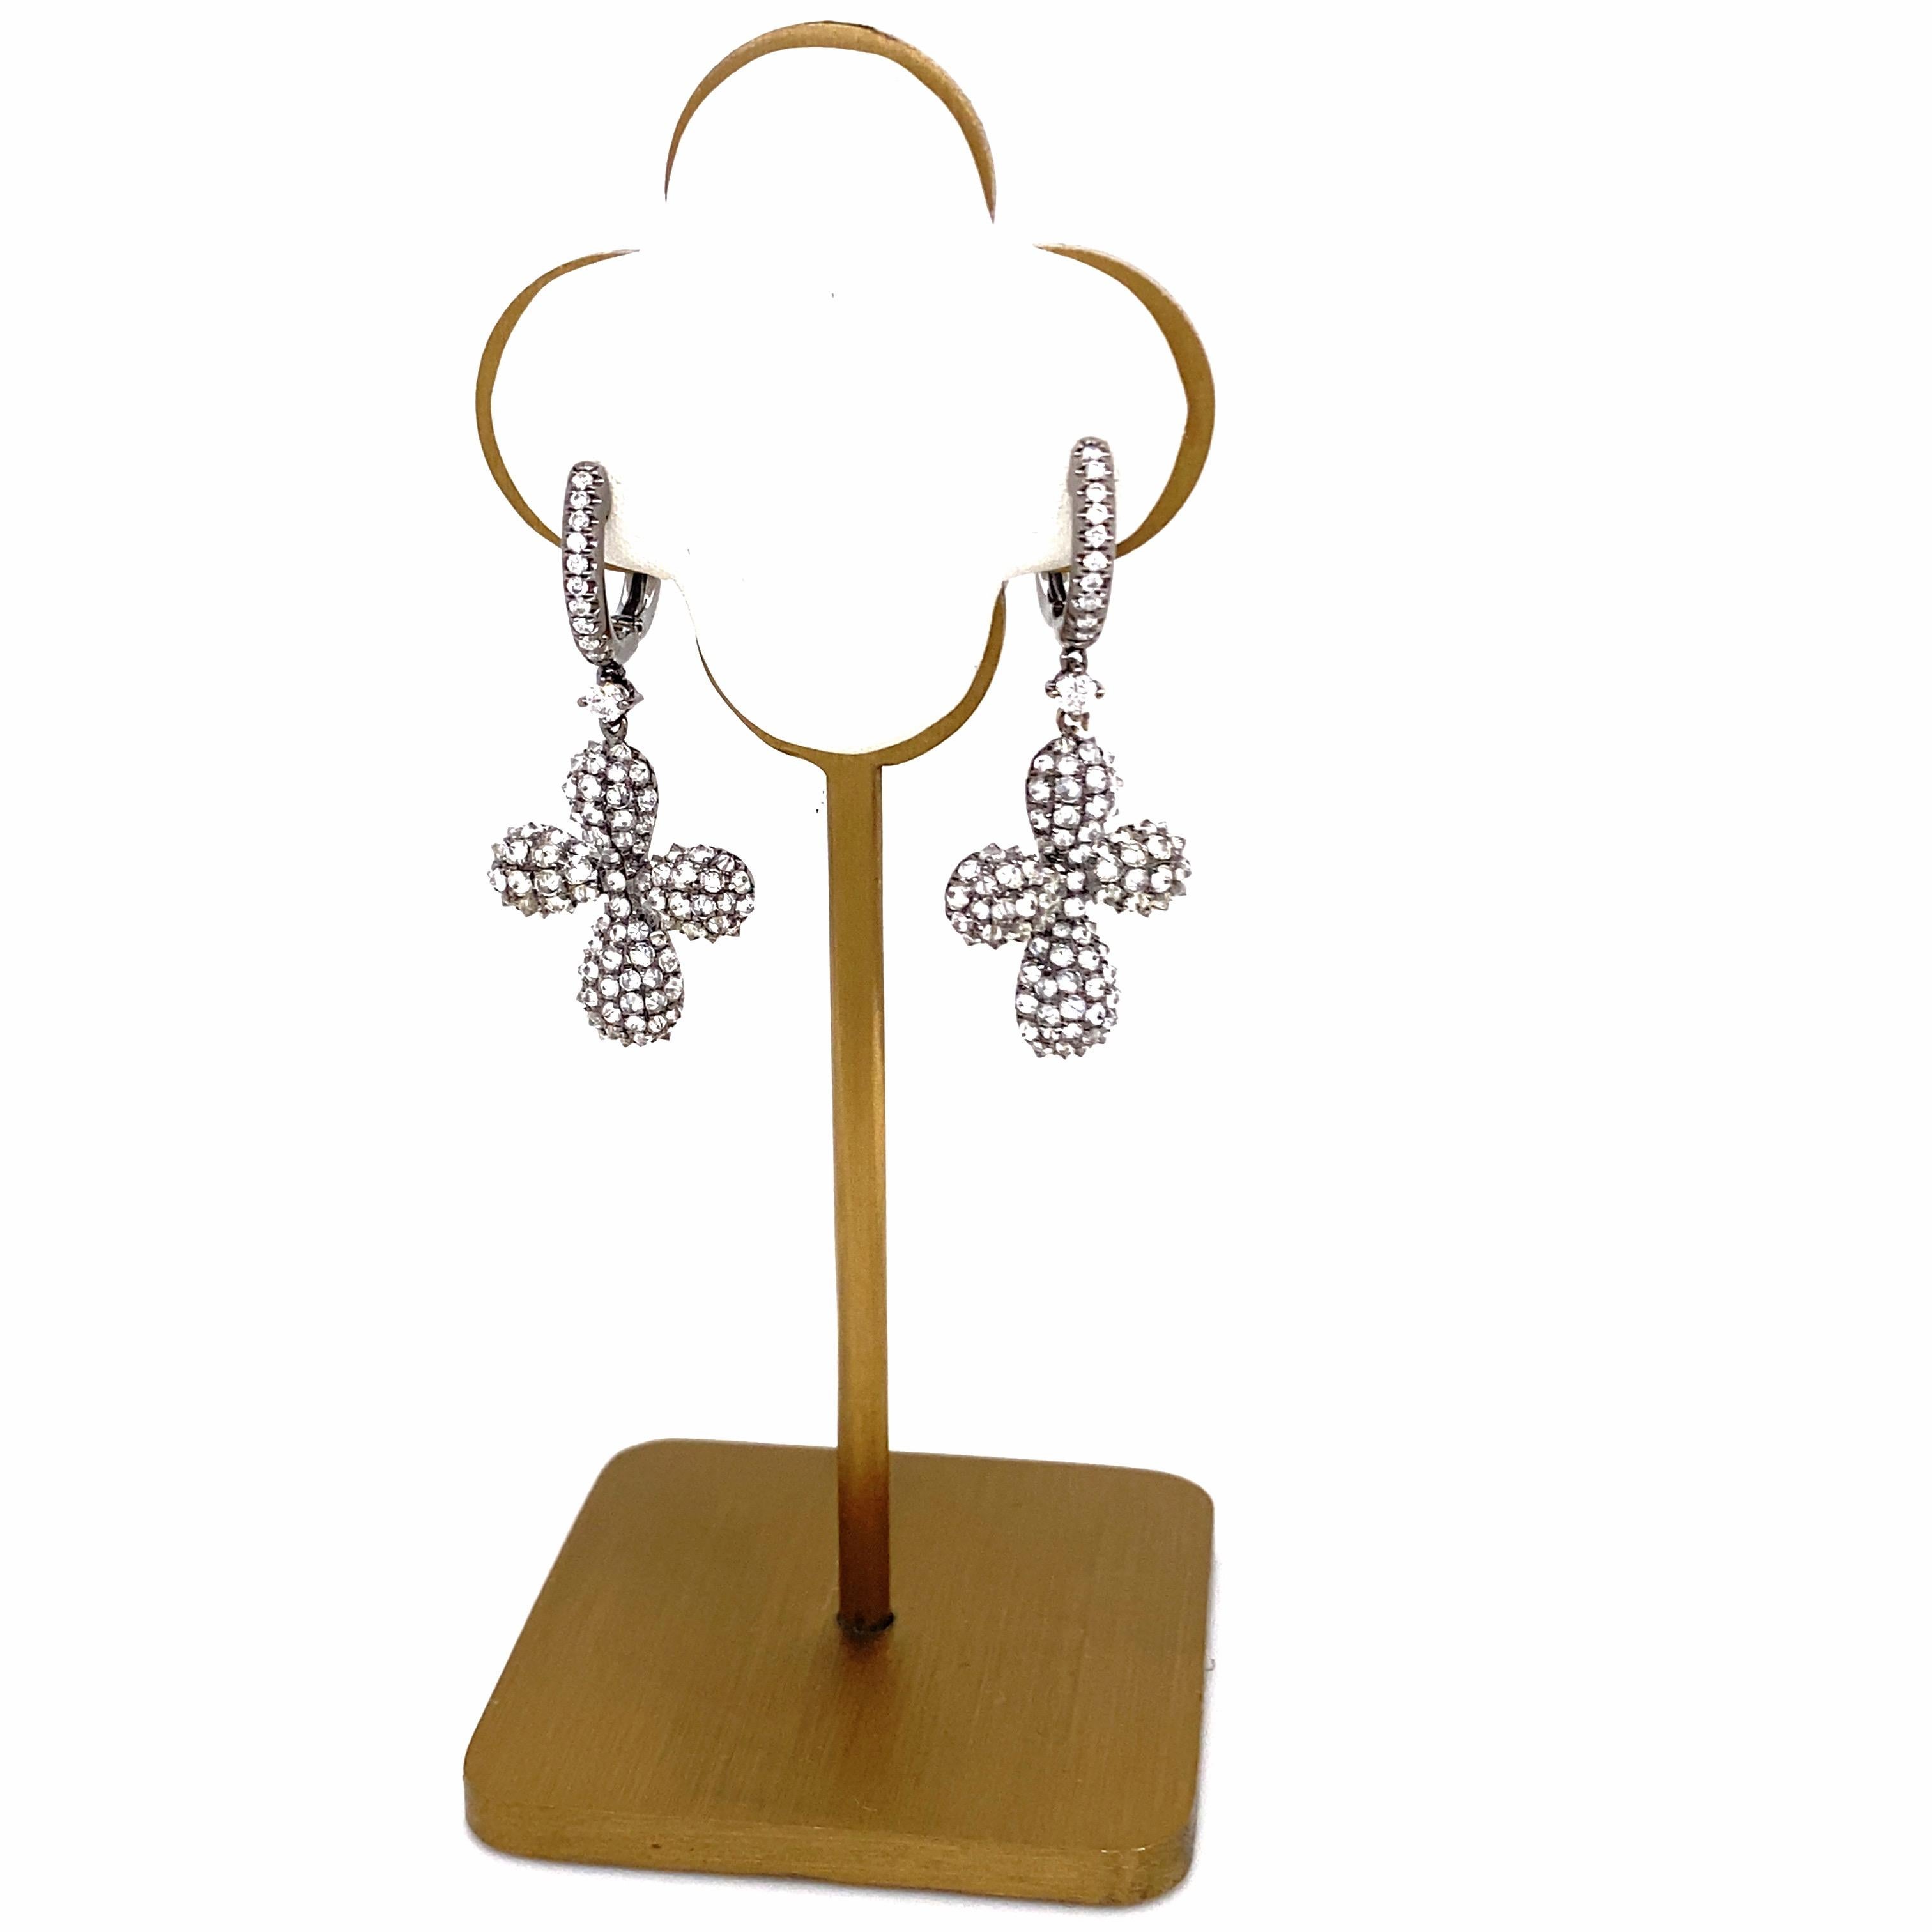 PIRANESI Diamond Cross Drop Earrings
Style:  Drop
Metal:  18kt Black Gold
Size:  1.25' Inches Length
TCW:  2.31 tcw
Main Diamond:  Round Brilliant Diamonds 
Color & Clarity:  White Near Colorless - Slightly Included
*** Diamonds are set upside down